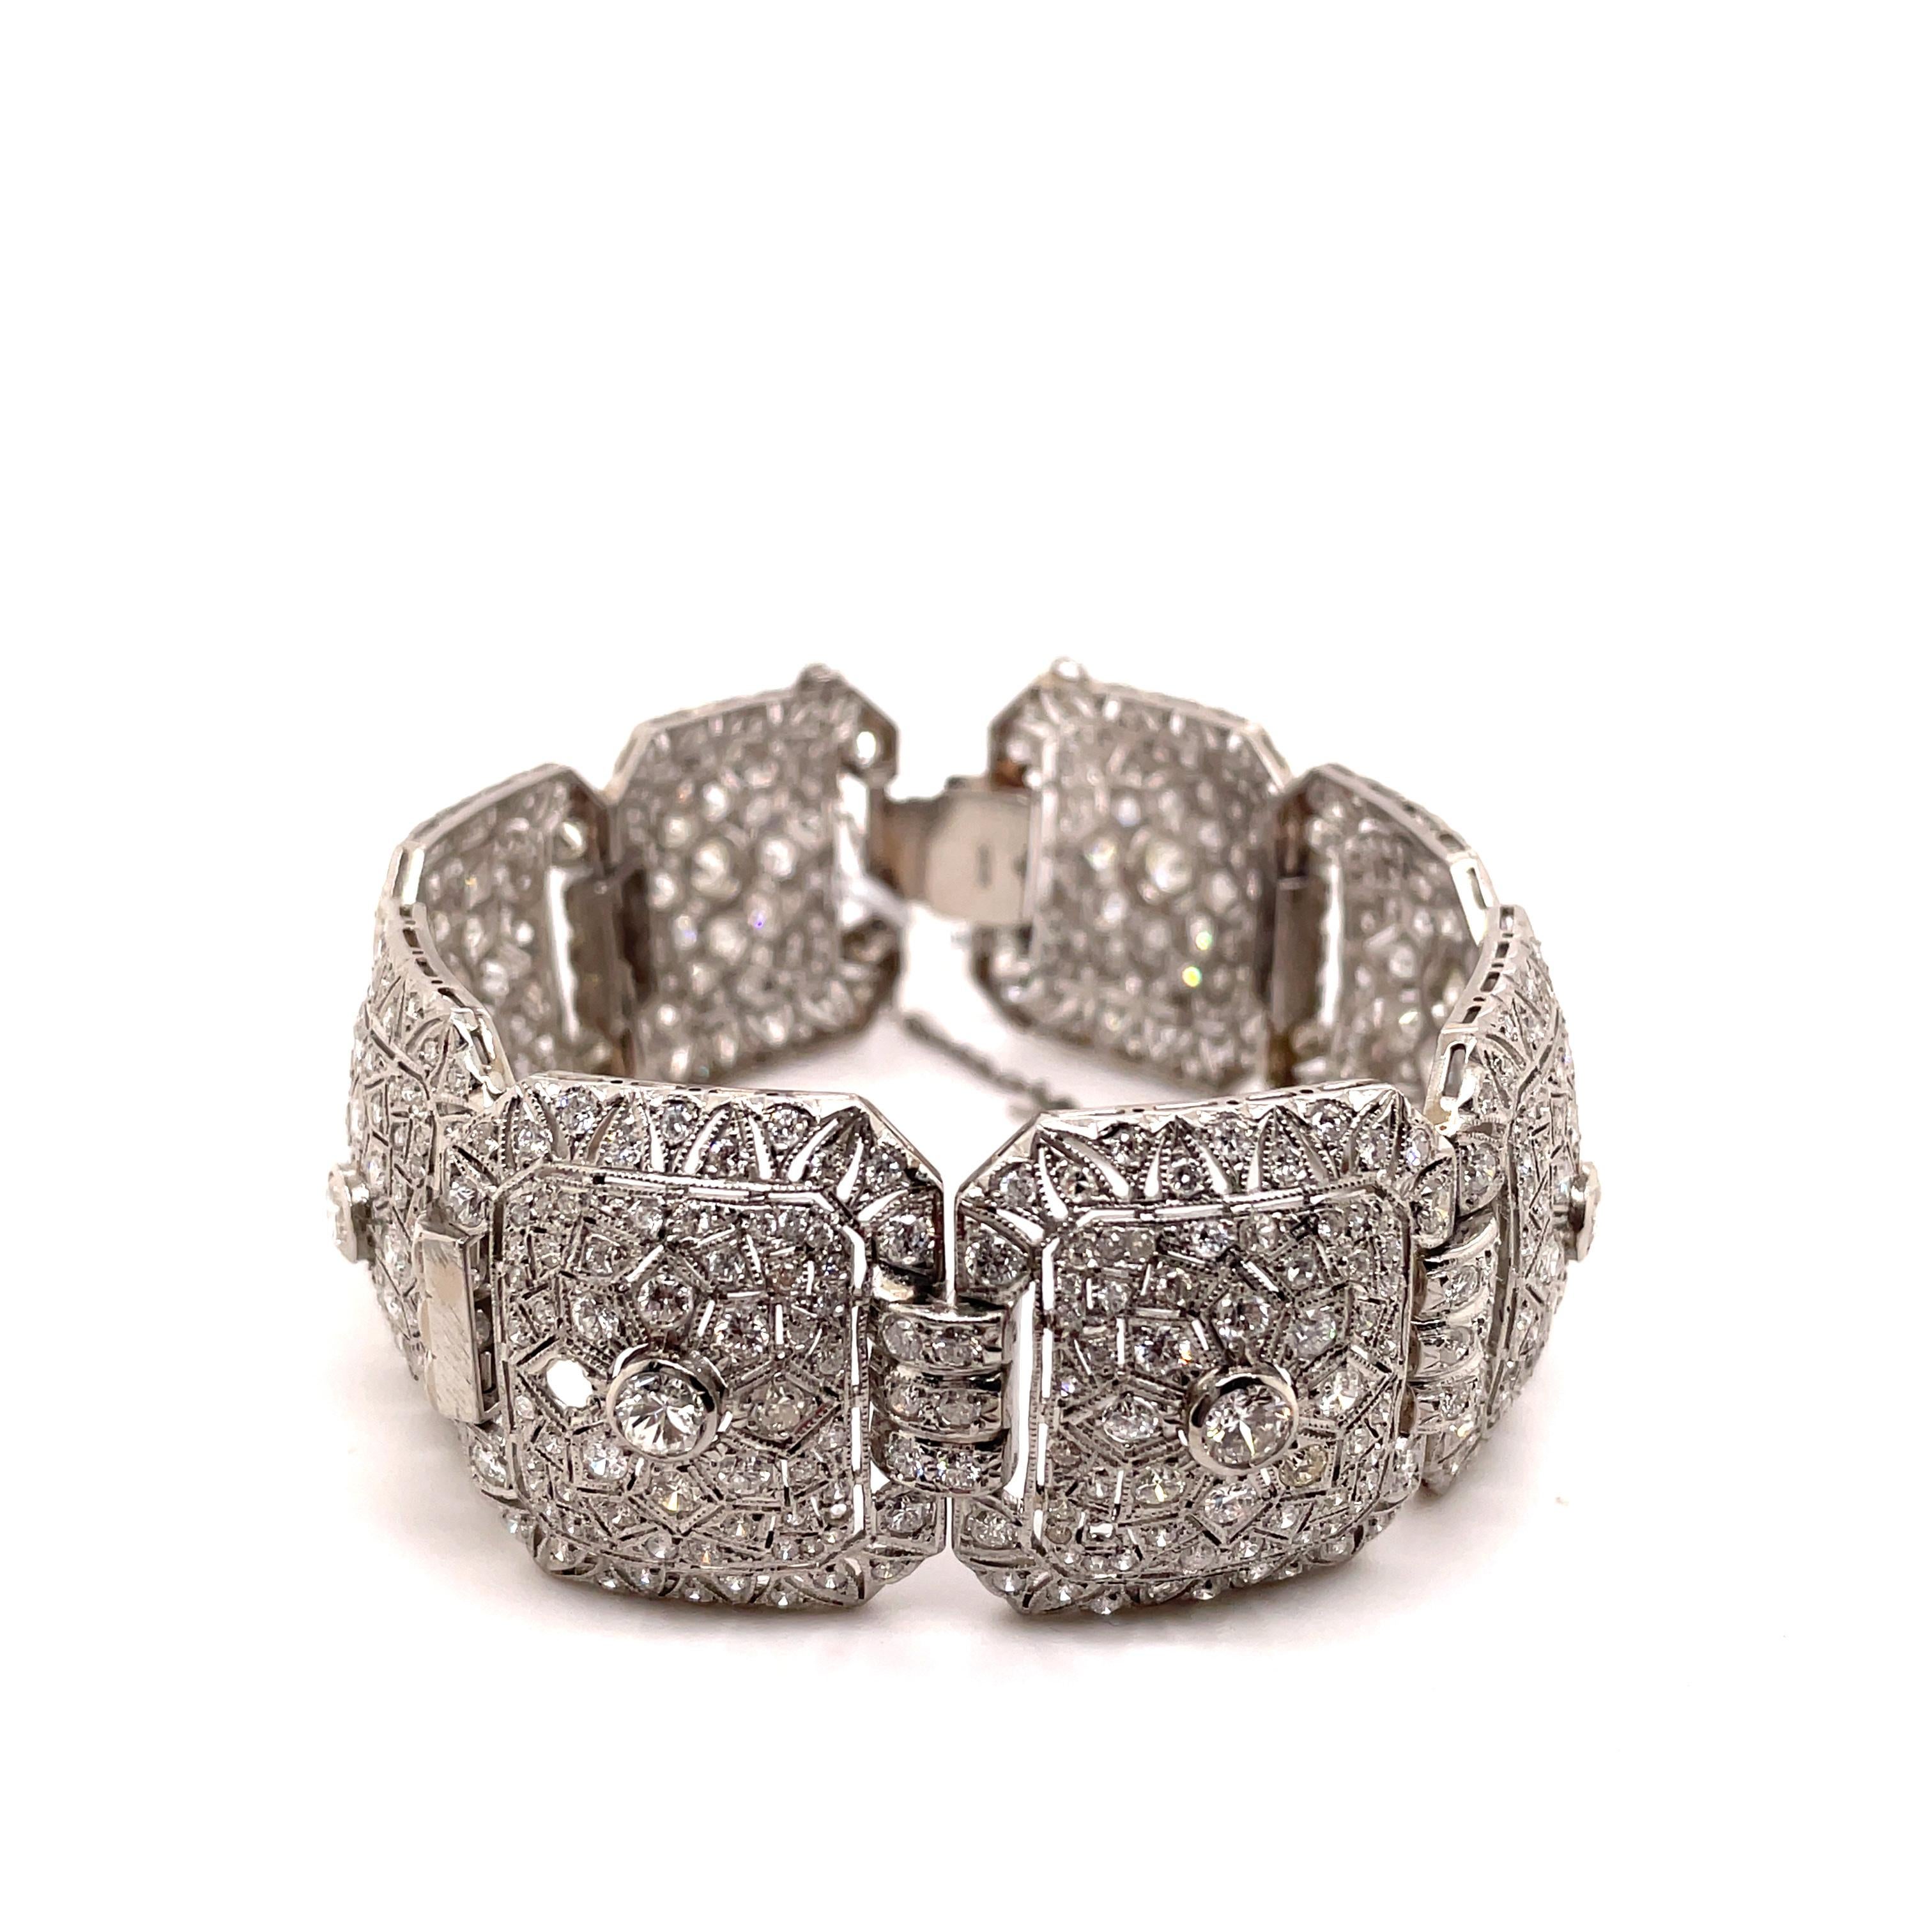 Vintage Art Deco Style 16.85ct Diamond Bracelet Platinum In Excellent Condition For Sale In BEVERLY HILLS, CA